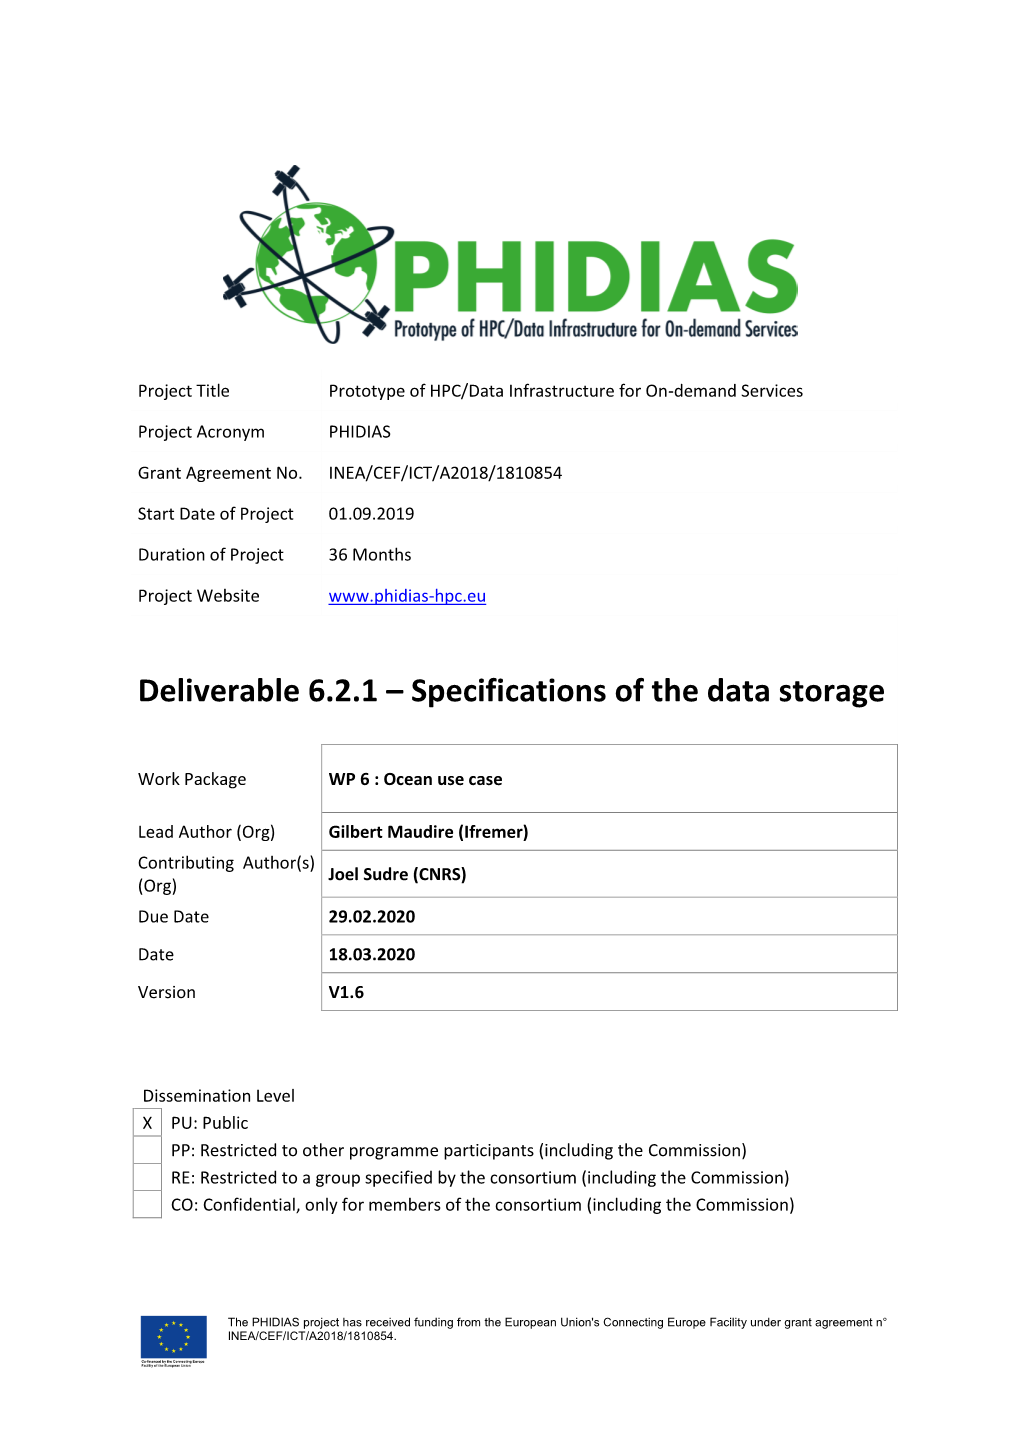 Specifications of the Data Storage